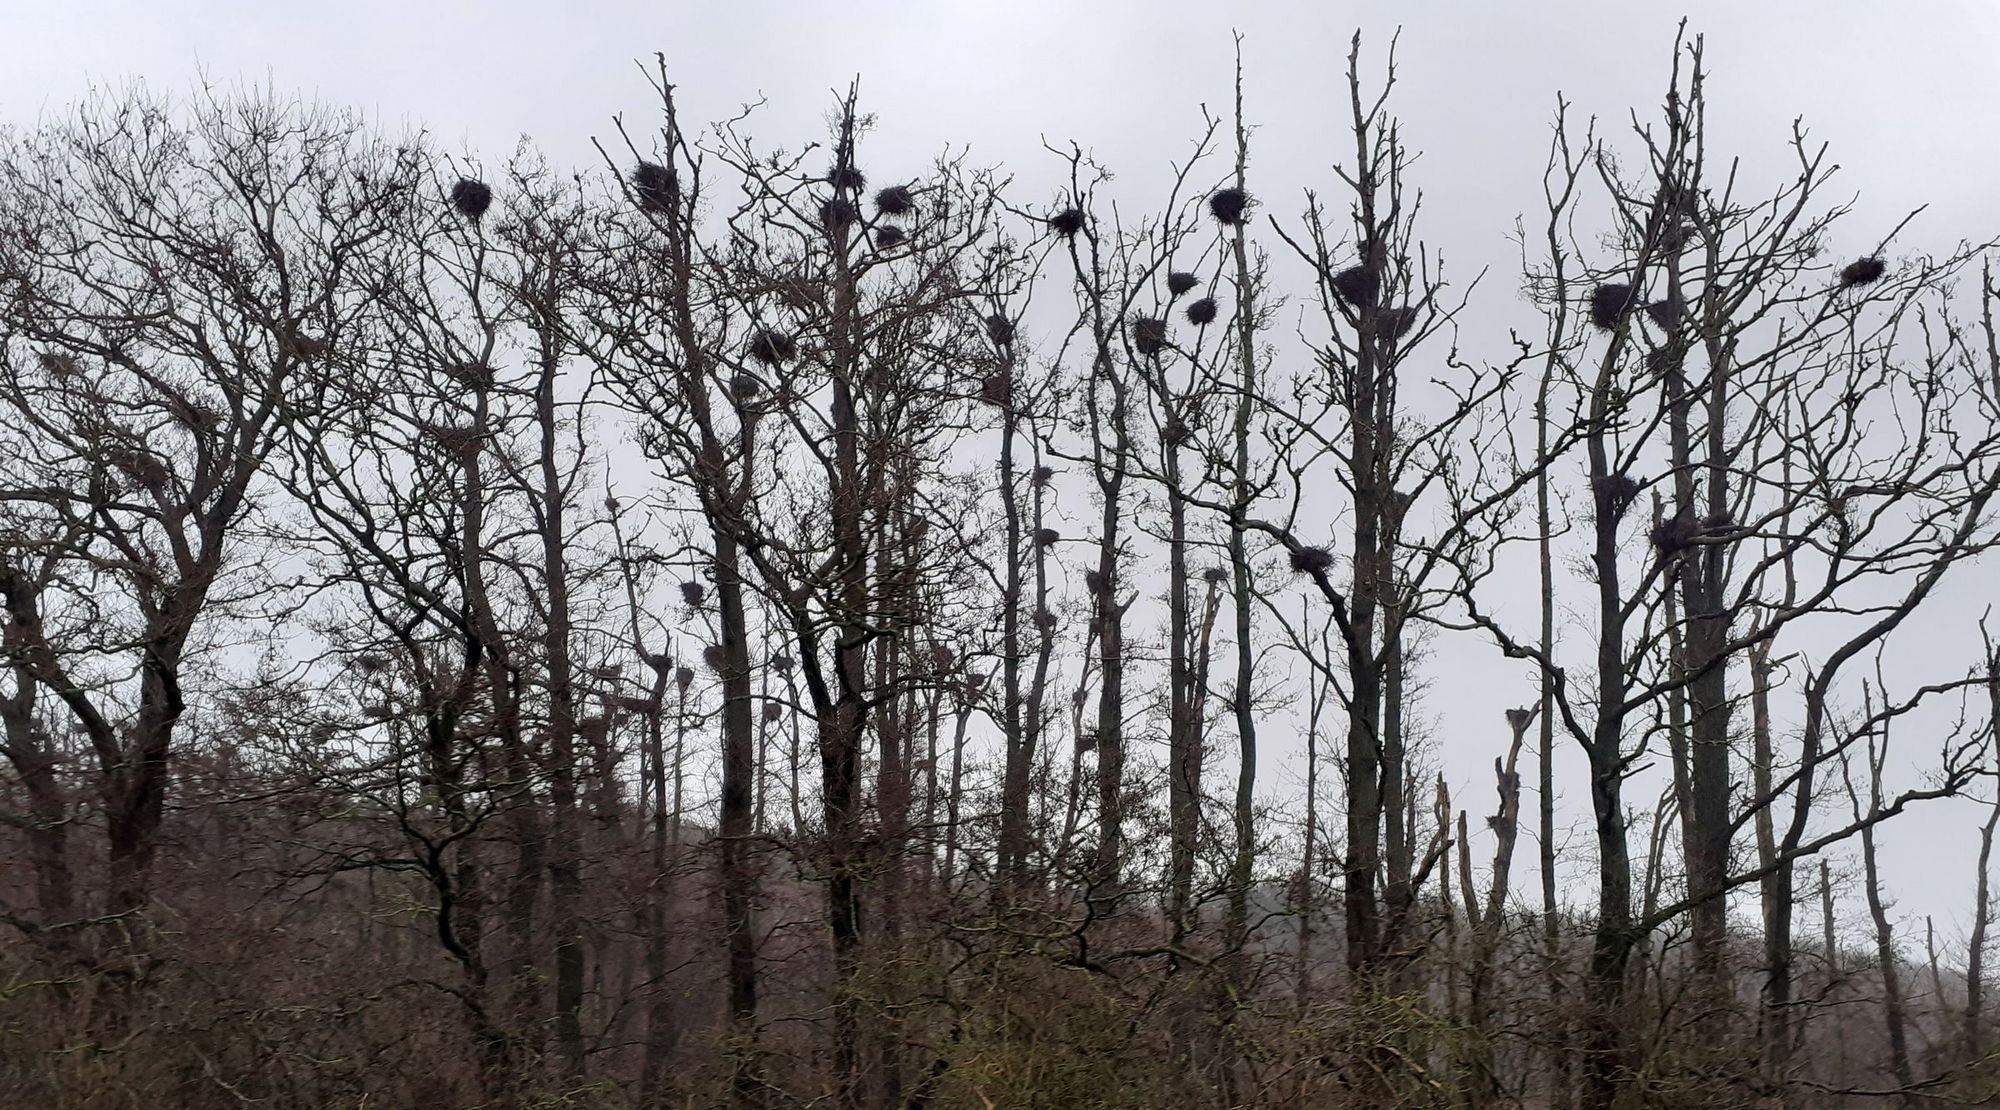 Row of trees with cormorant nests on a cloudy day, forest in the background